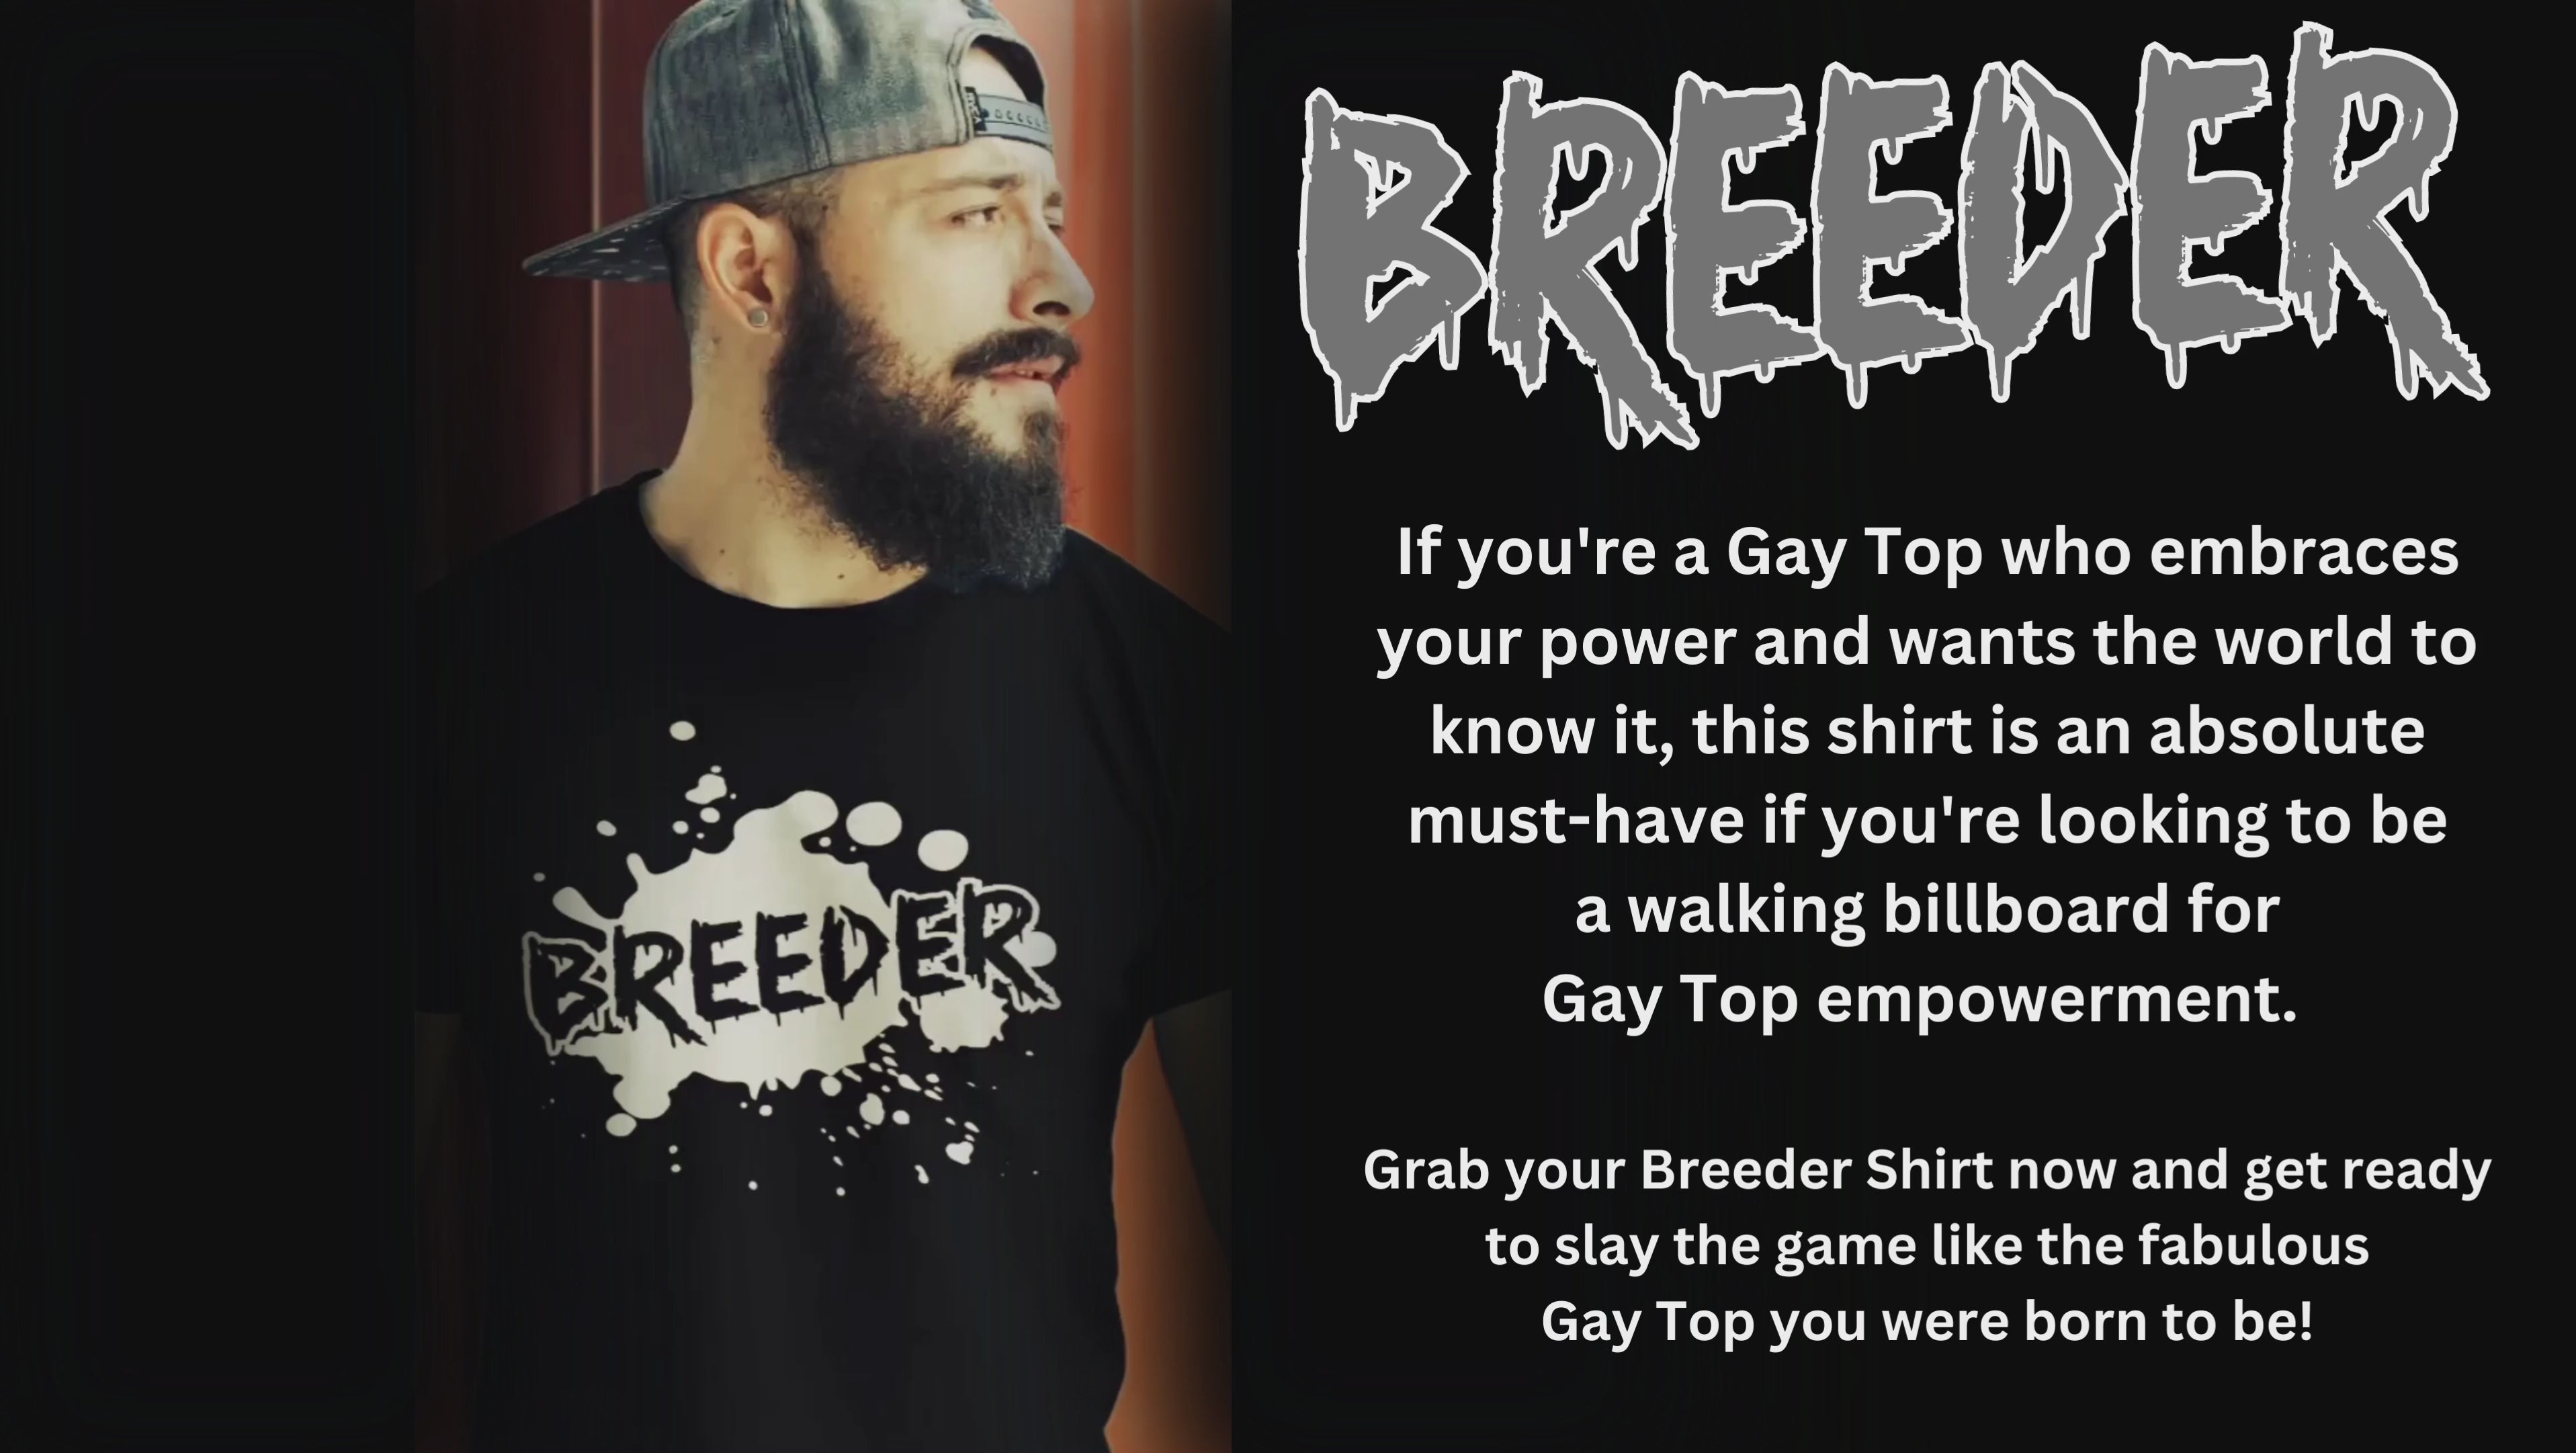 Load video: Unleash Your Power as a Gay Top with our Must-Have Breeder Shirt | MoodyBootyApparel.com